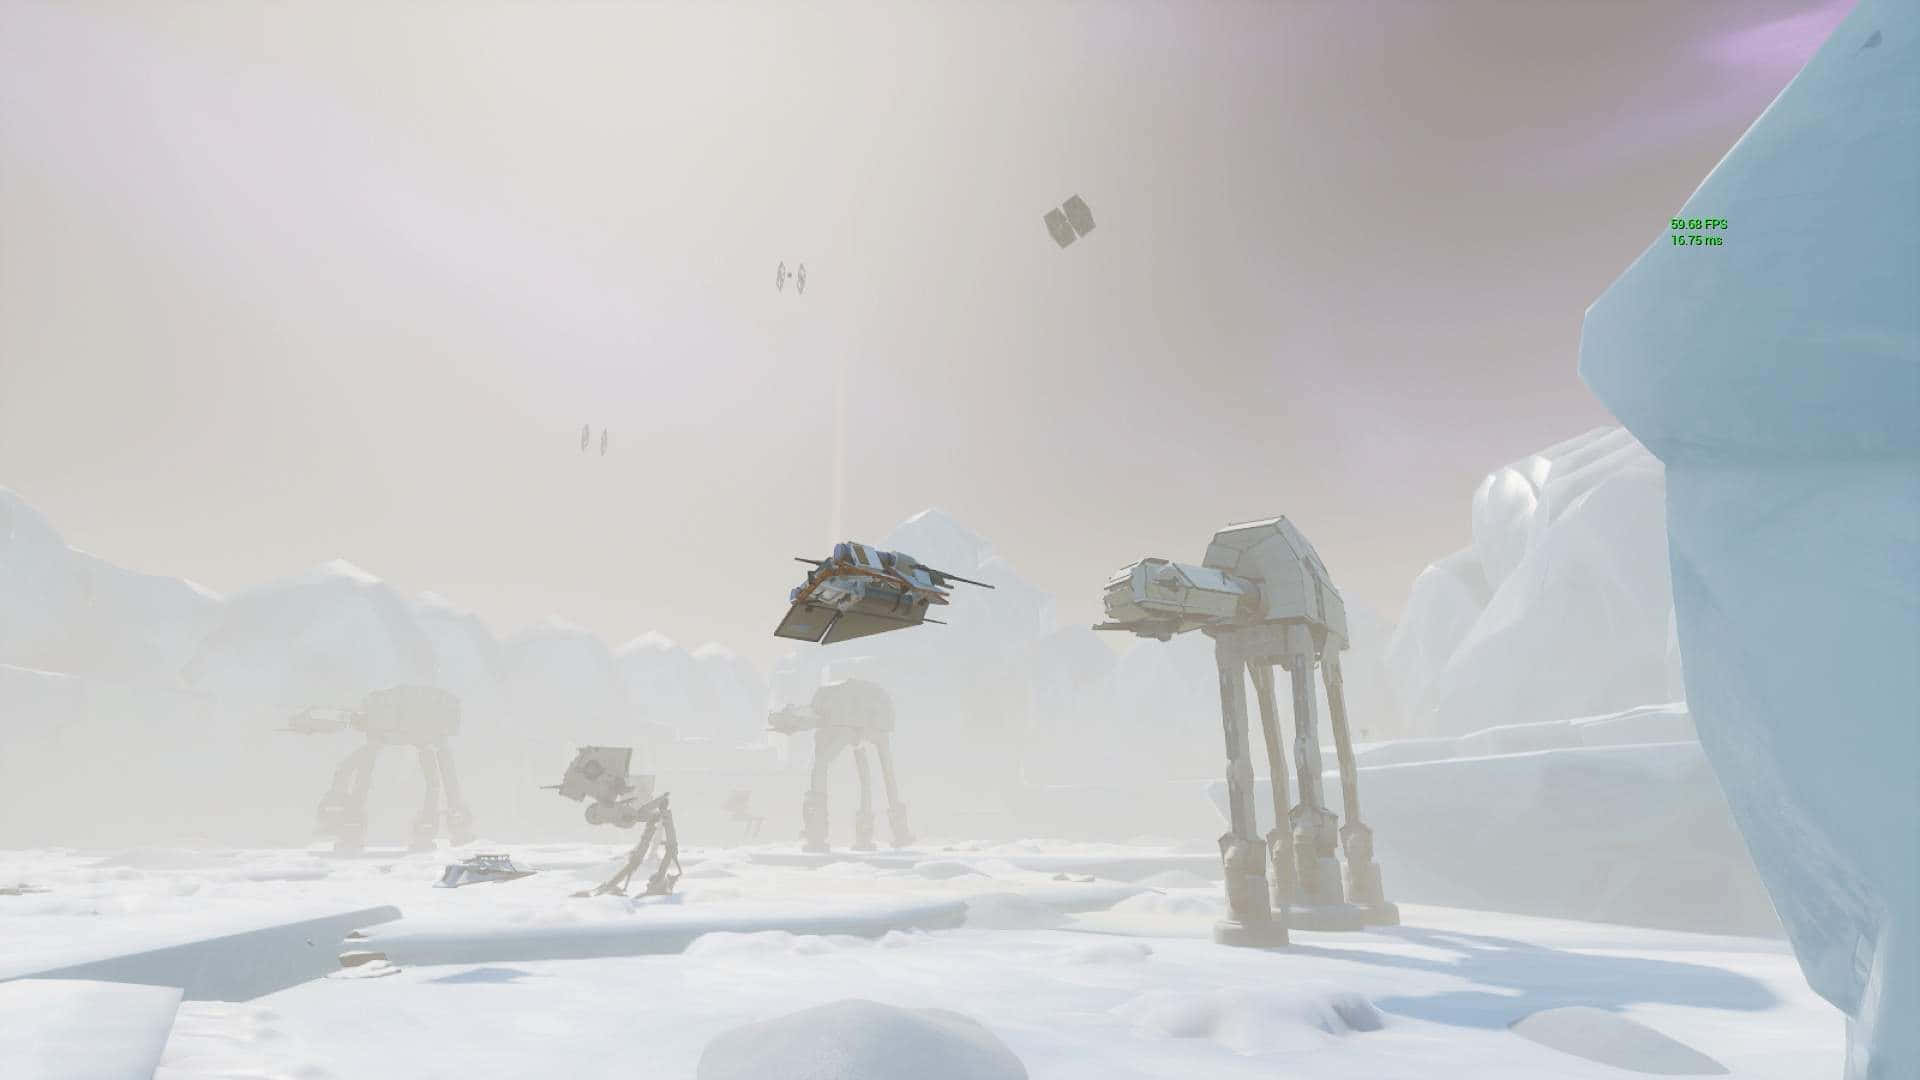 A realistic rendering of the iconic Star Wars AT-AT Wallpaper